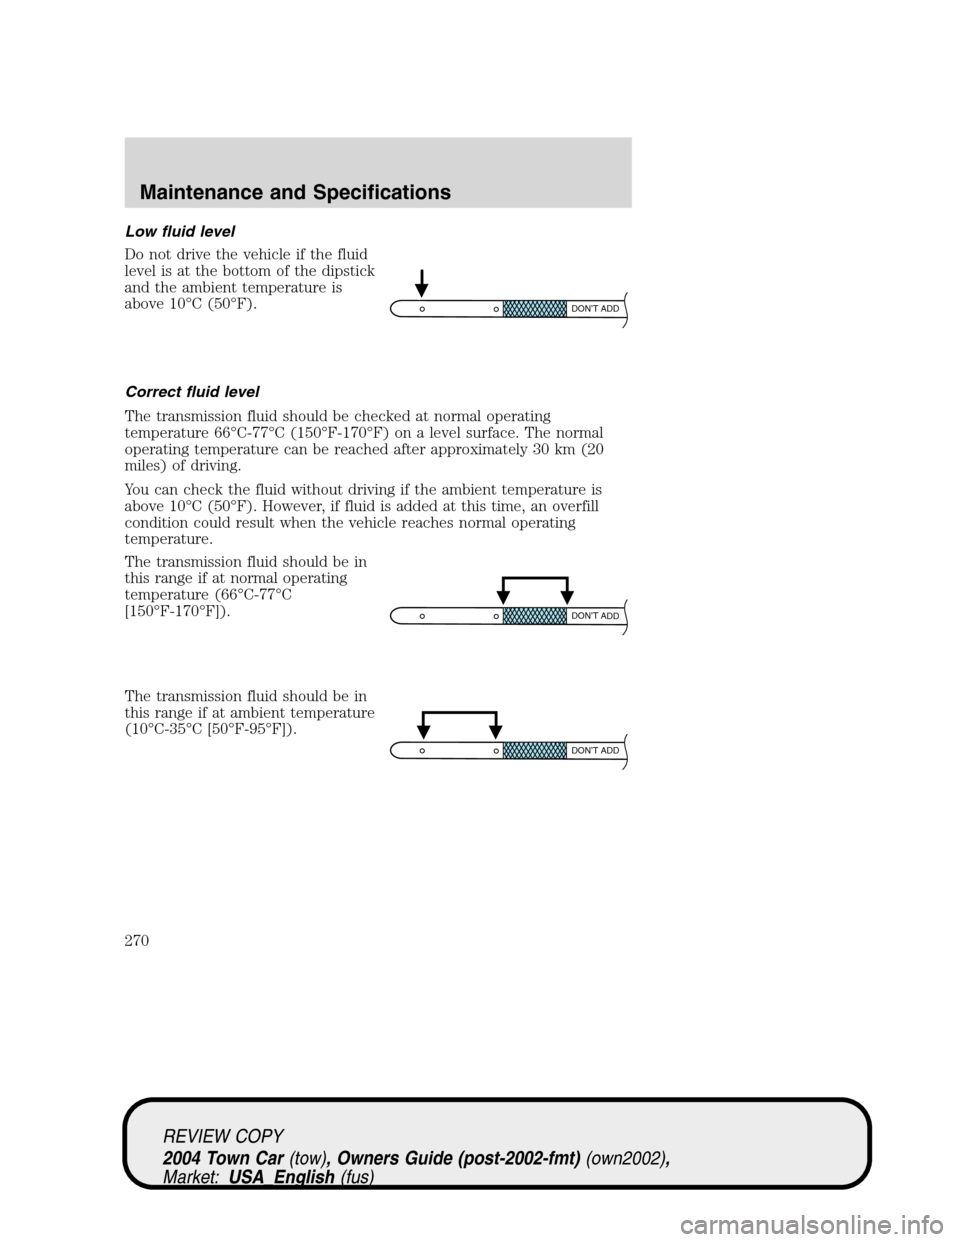 LINCOLN TOWN CAR 2004  Owners Manual Low fluid level
Do not drive the vehicle if the fluid
level is at the bottom of the dipstick
and the ambient temperature is
above 10°C (50°F).
Correct fluid level
The transmission fluid should be ch